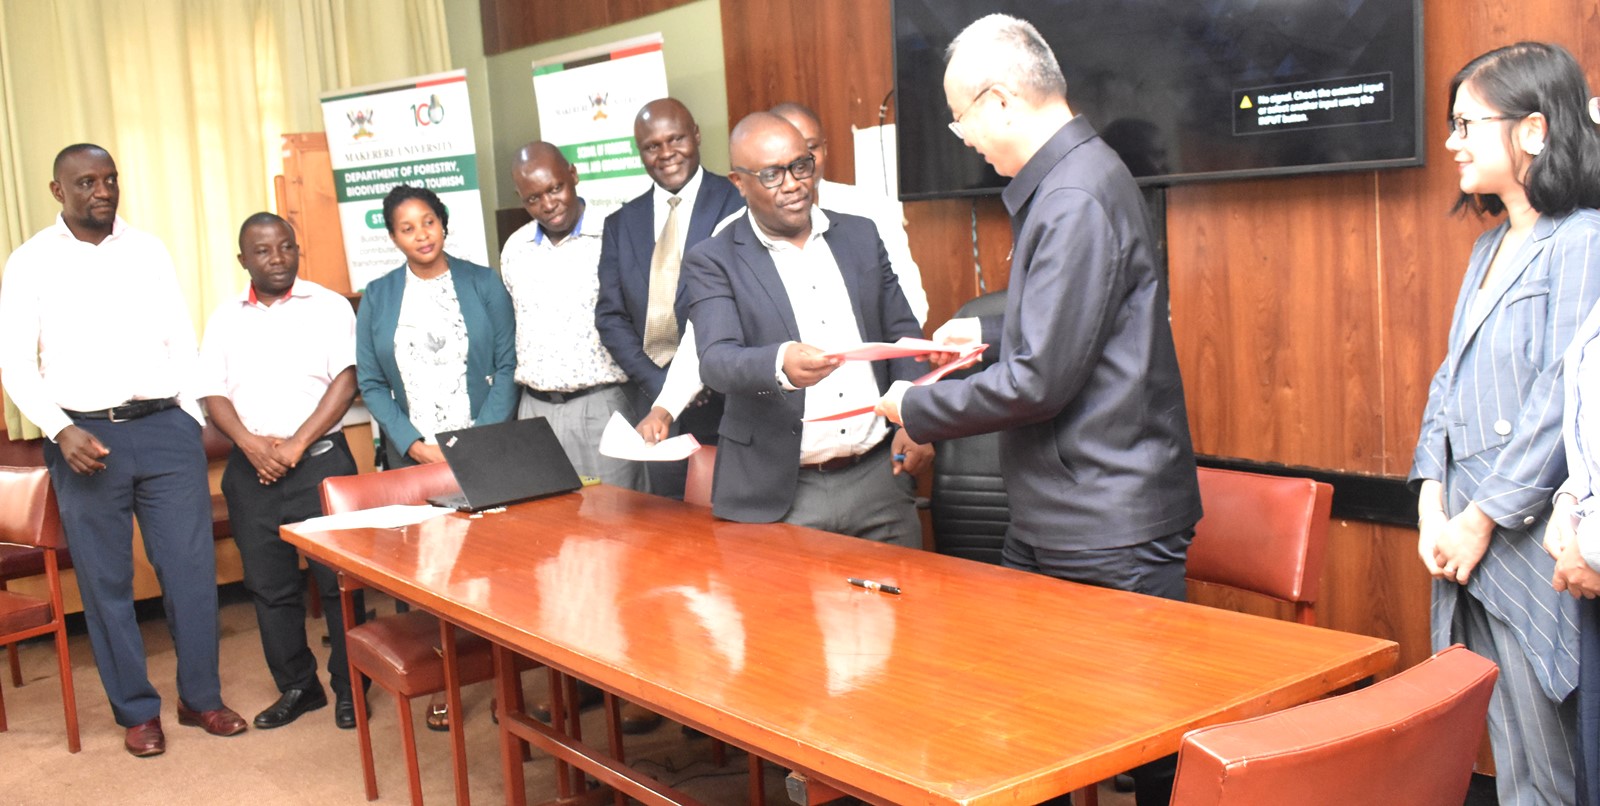 The representative of Makerere University Vice Chancellor, also Dean SFEGS, Dr Revocatus Twinomuhangi handing over signed MoU to the Vice President of NUIST. Makerere University-Nanjing University of Information Science and Technology (NUIST) MoU Signing to formalize collaboration in teaching and learning, research and publication, technology transfer, and resource mobilization, 12th July 2024, School of Forestry, Environmental, and Geographical Sciences (SFEGS) Board Room, College of Agricultural and Environmental Sciences (CAES), Kampala Uganda, East Africa.